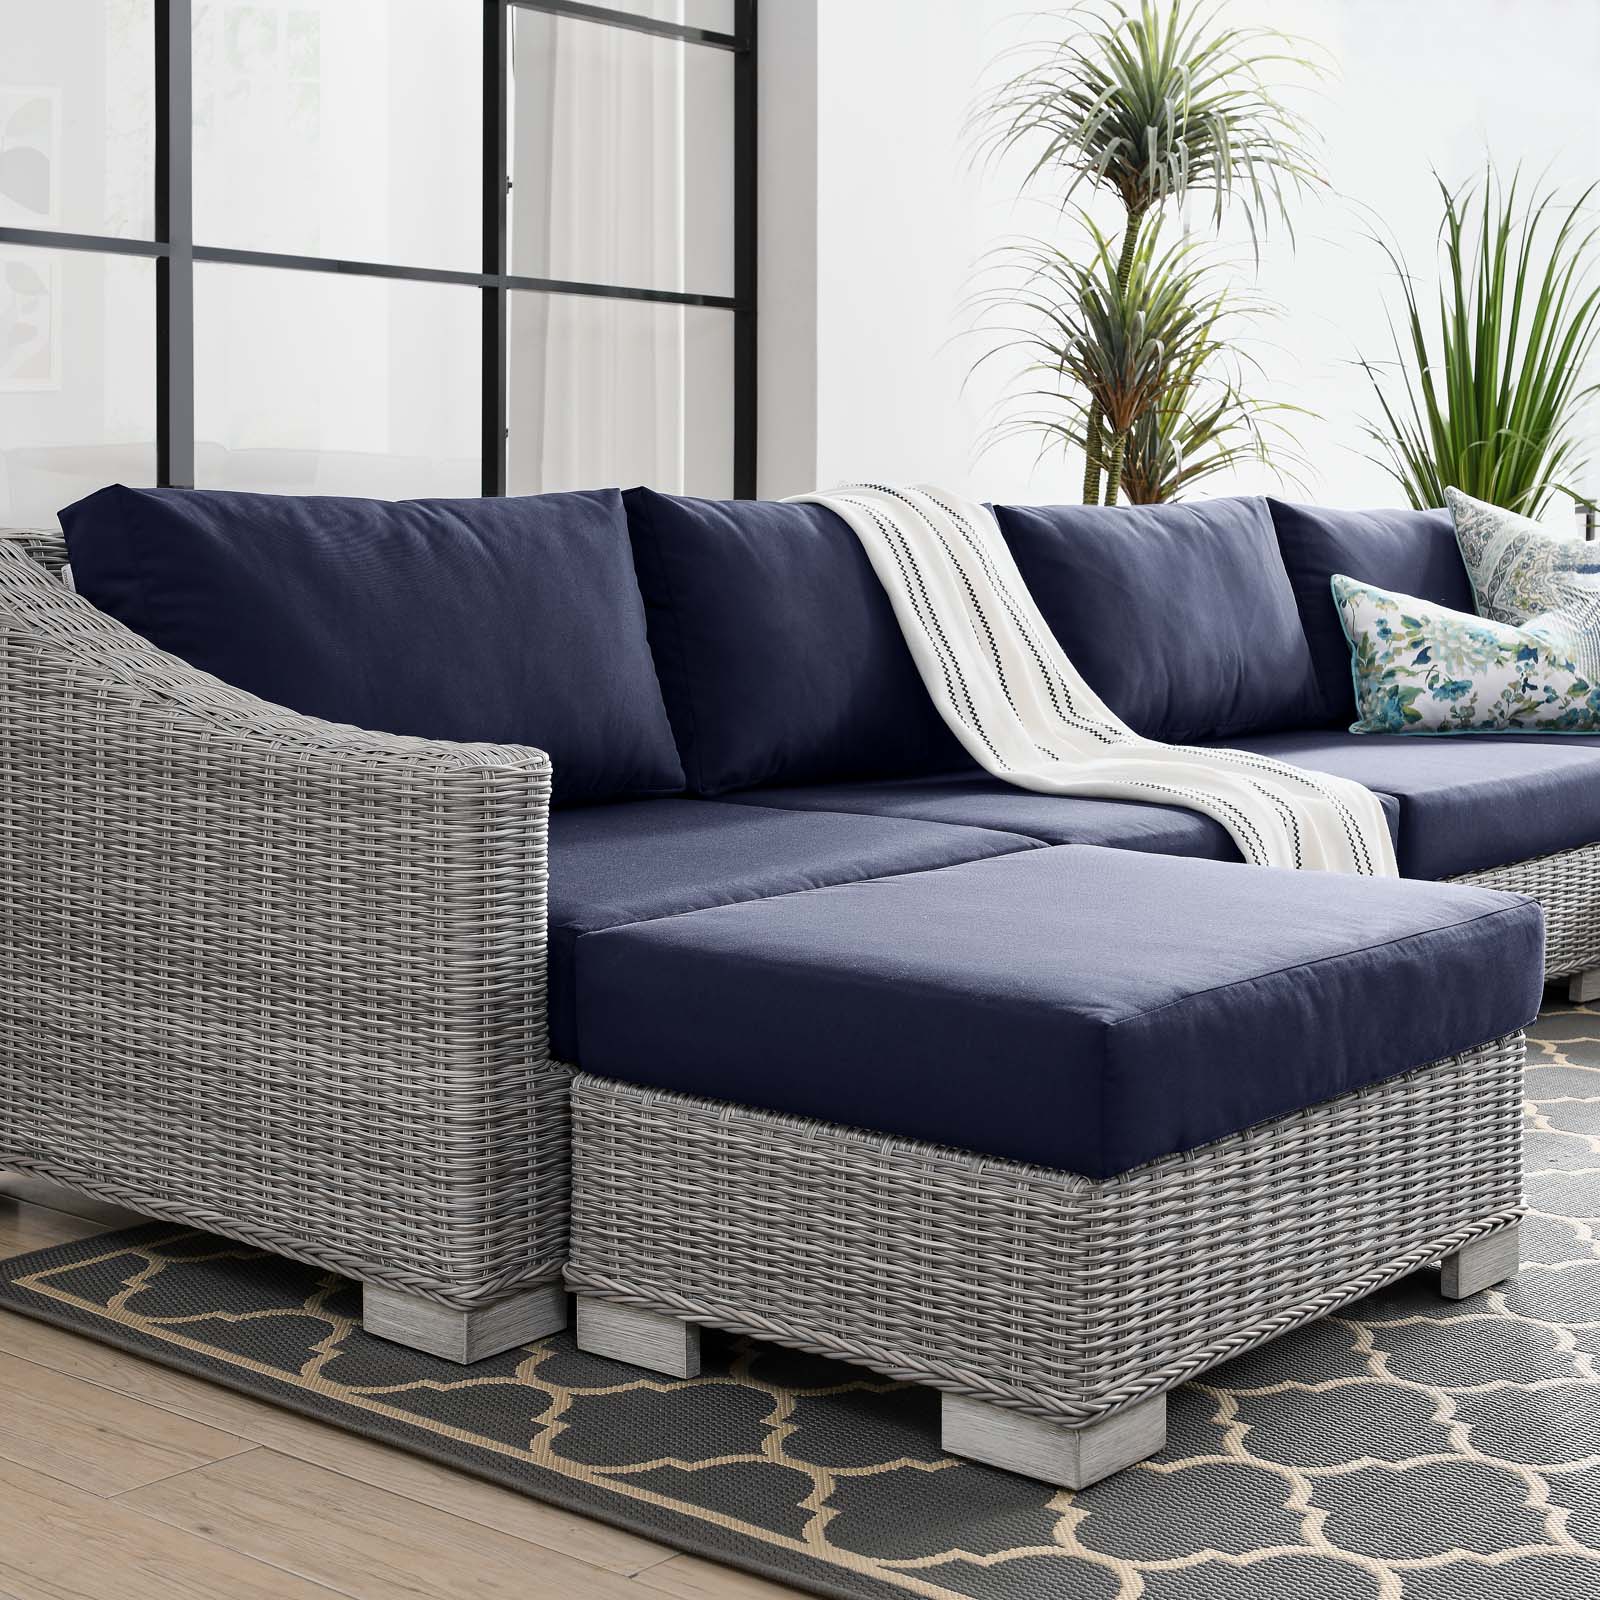 Lounge Sectional Sofa Chair Set, Rattan, Wicker, Light Grey Gray Blue Navy, Modern Contemporary Urban Design, Outdoor Patio Balcony Cafe Bistro Garden Furniture Hotel Hospitality - image 5 of 10